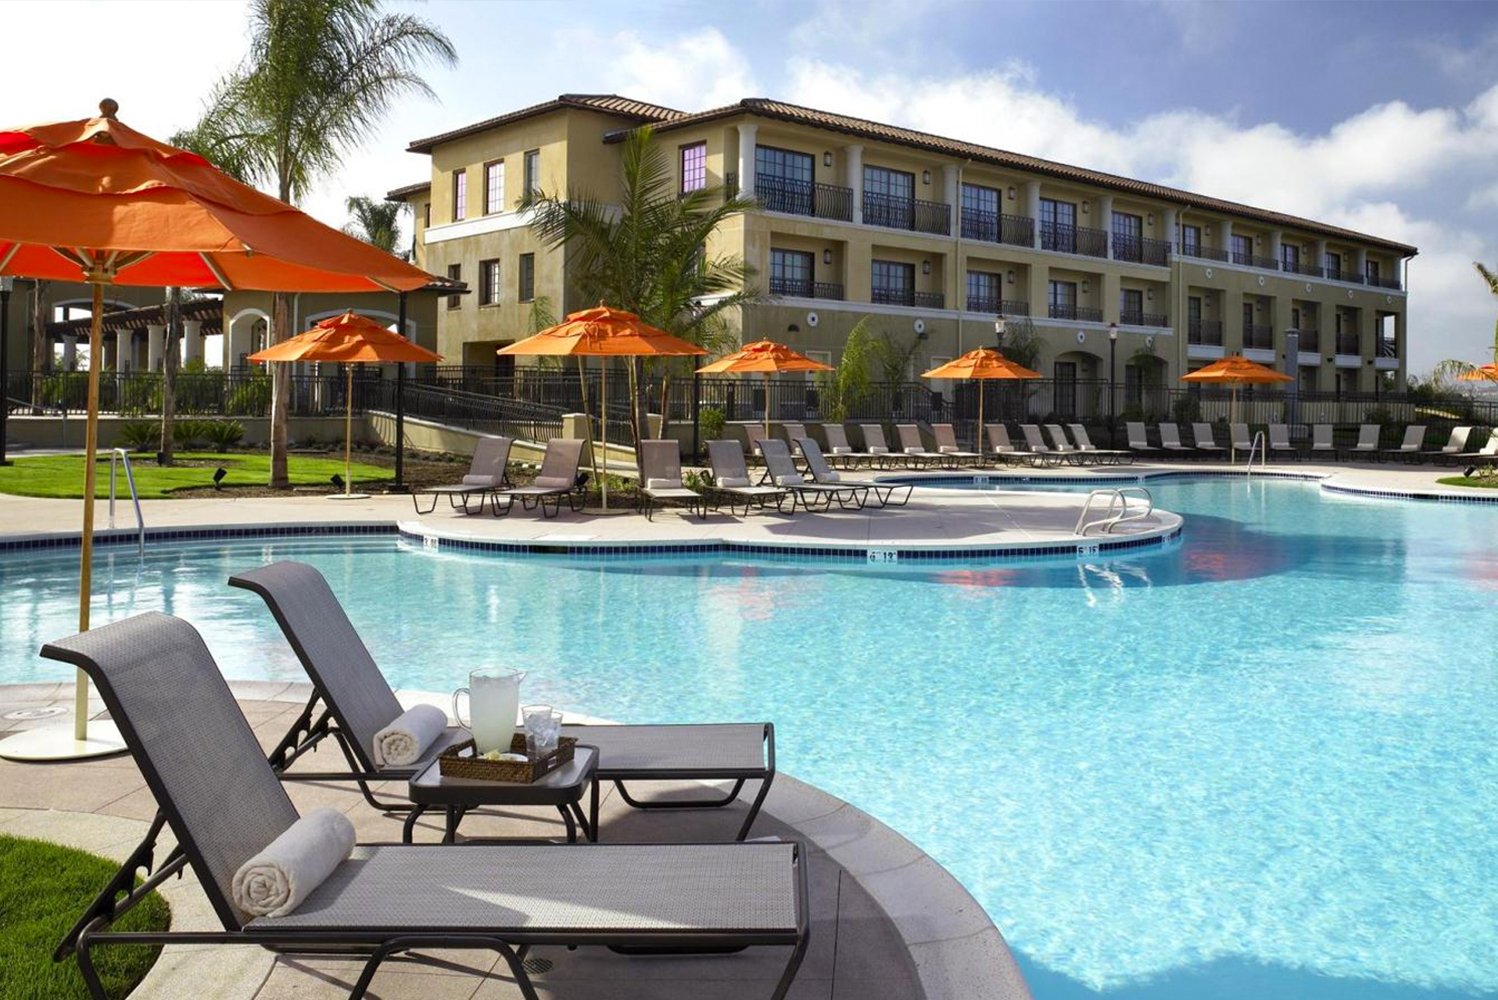 Sheraton Carlsbad Resort  Spa in Carlsbad California is undergoing renovation that is expected to be completed this June 